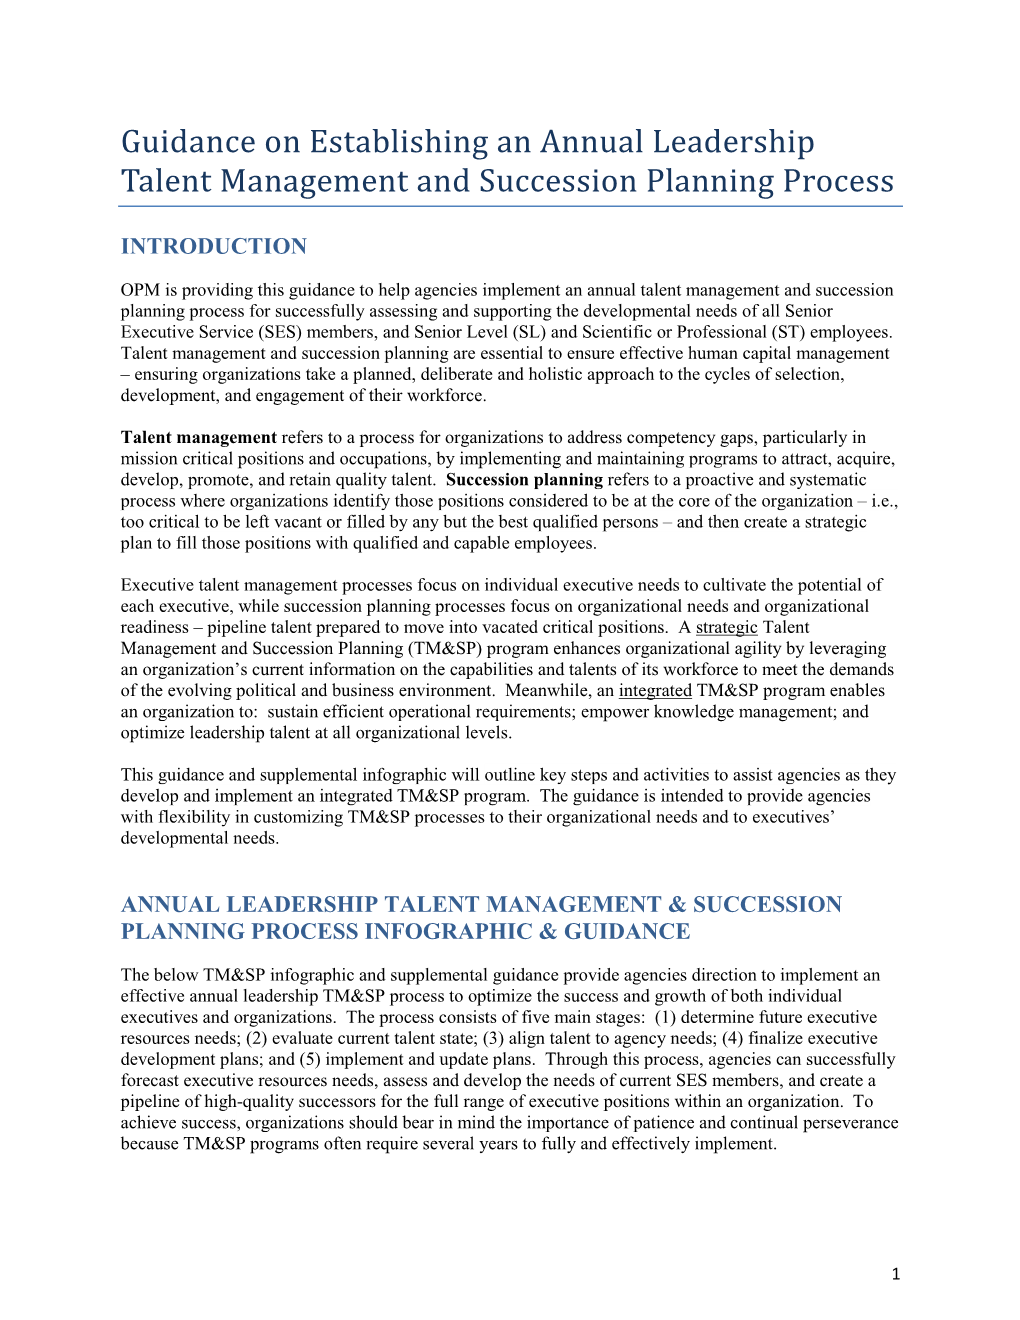 Guidance on Establishing an Annual Leadership Talent Management and Succession Planning Process